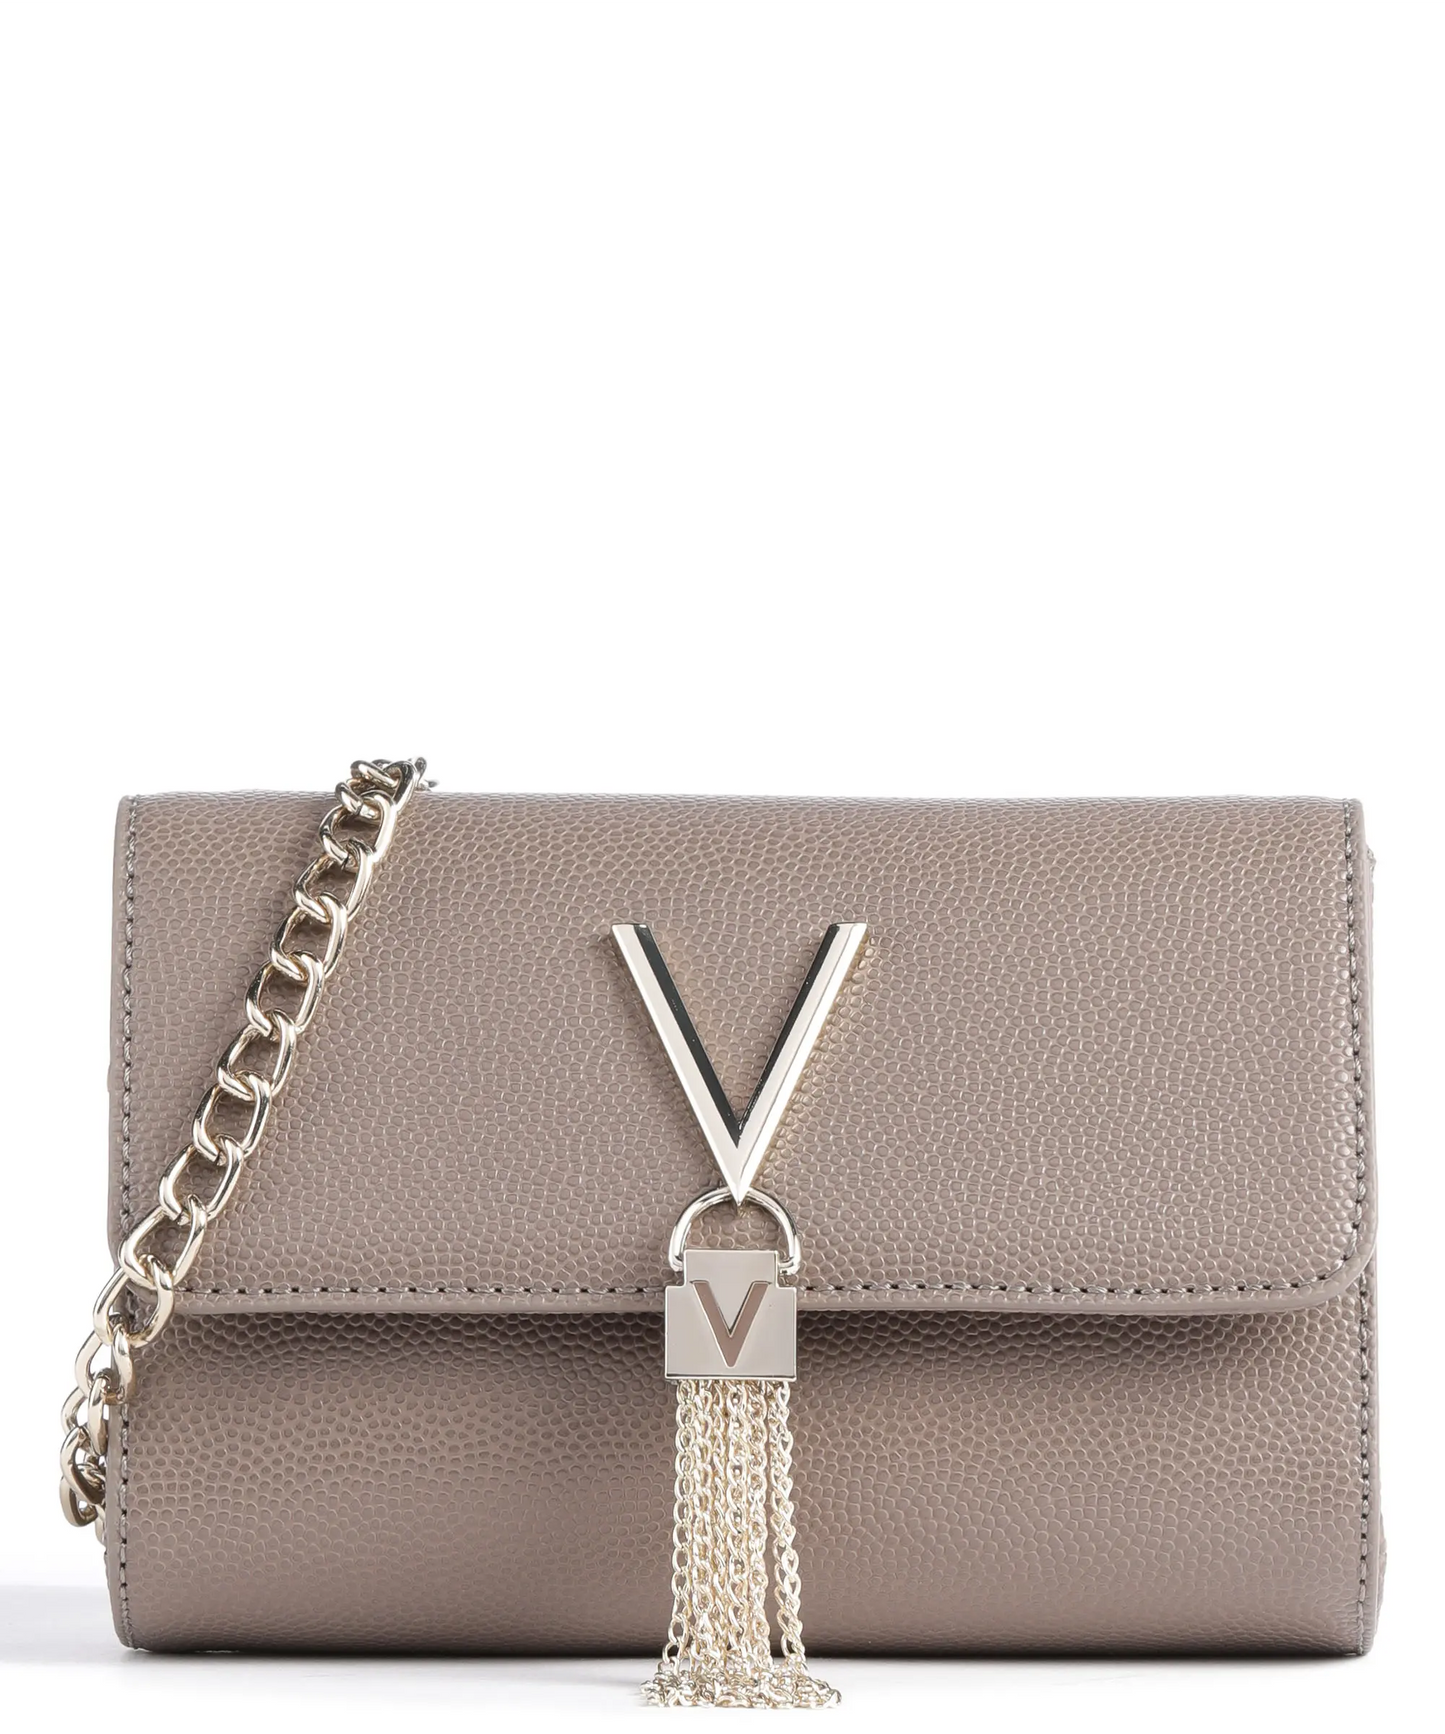 Valentino Bags Divina Bag in Taupe